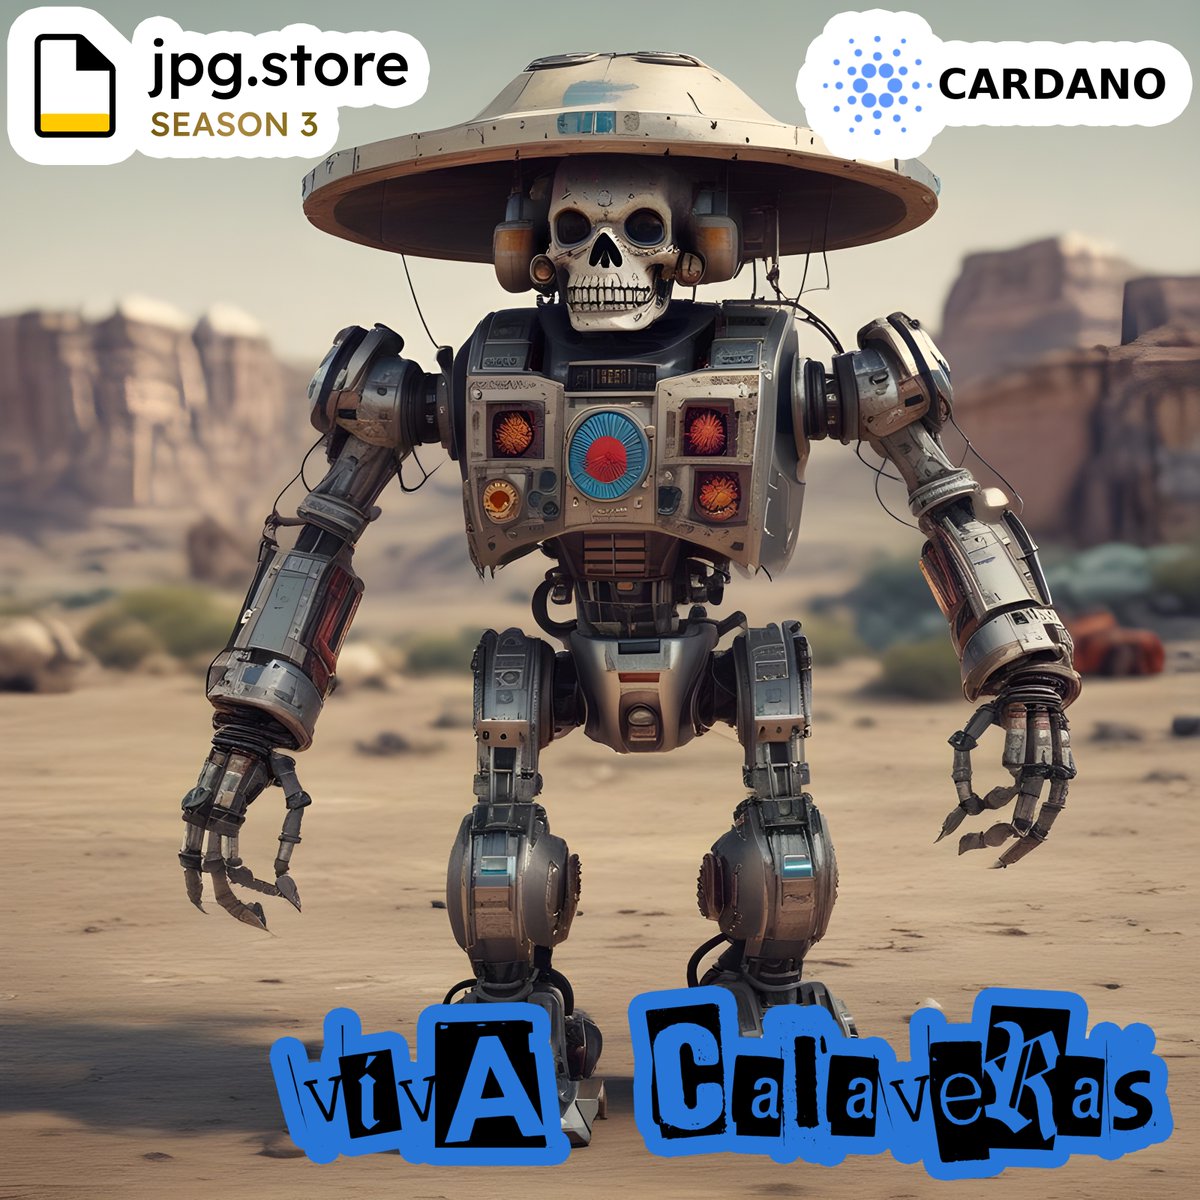 Viva Calaveras on Cardano via jpg.store ! These NFTs can be redeemed for a signed 3D printed K-SCOPES® Trading Card.

Proto
jpg.store/listing/226770…

#cardano #ADA #CardanoNFT #NFT #vivacalaveras #calaveras #kscopes #tradingcards #3dprinting #AI #AImusic